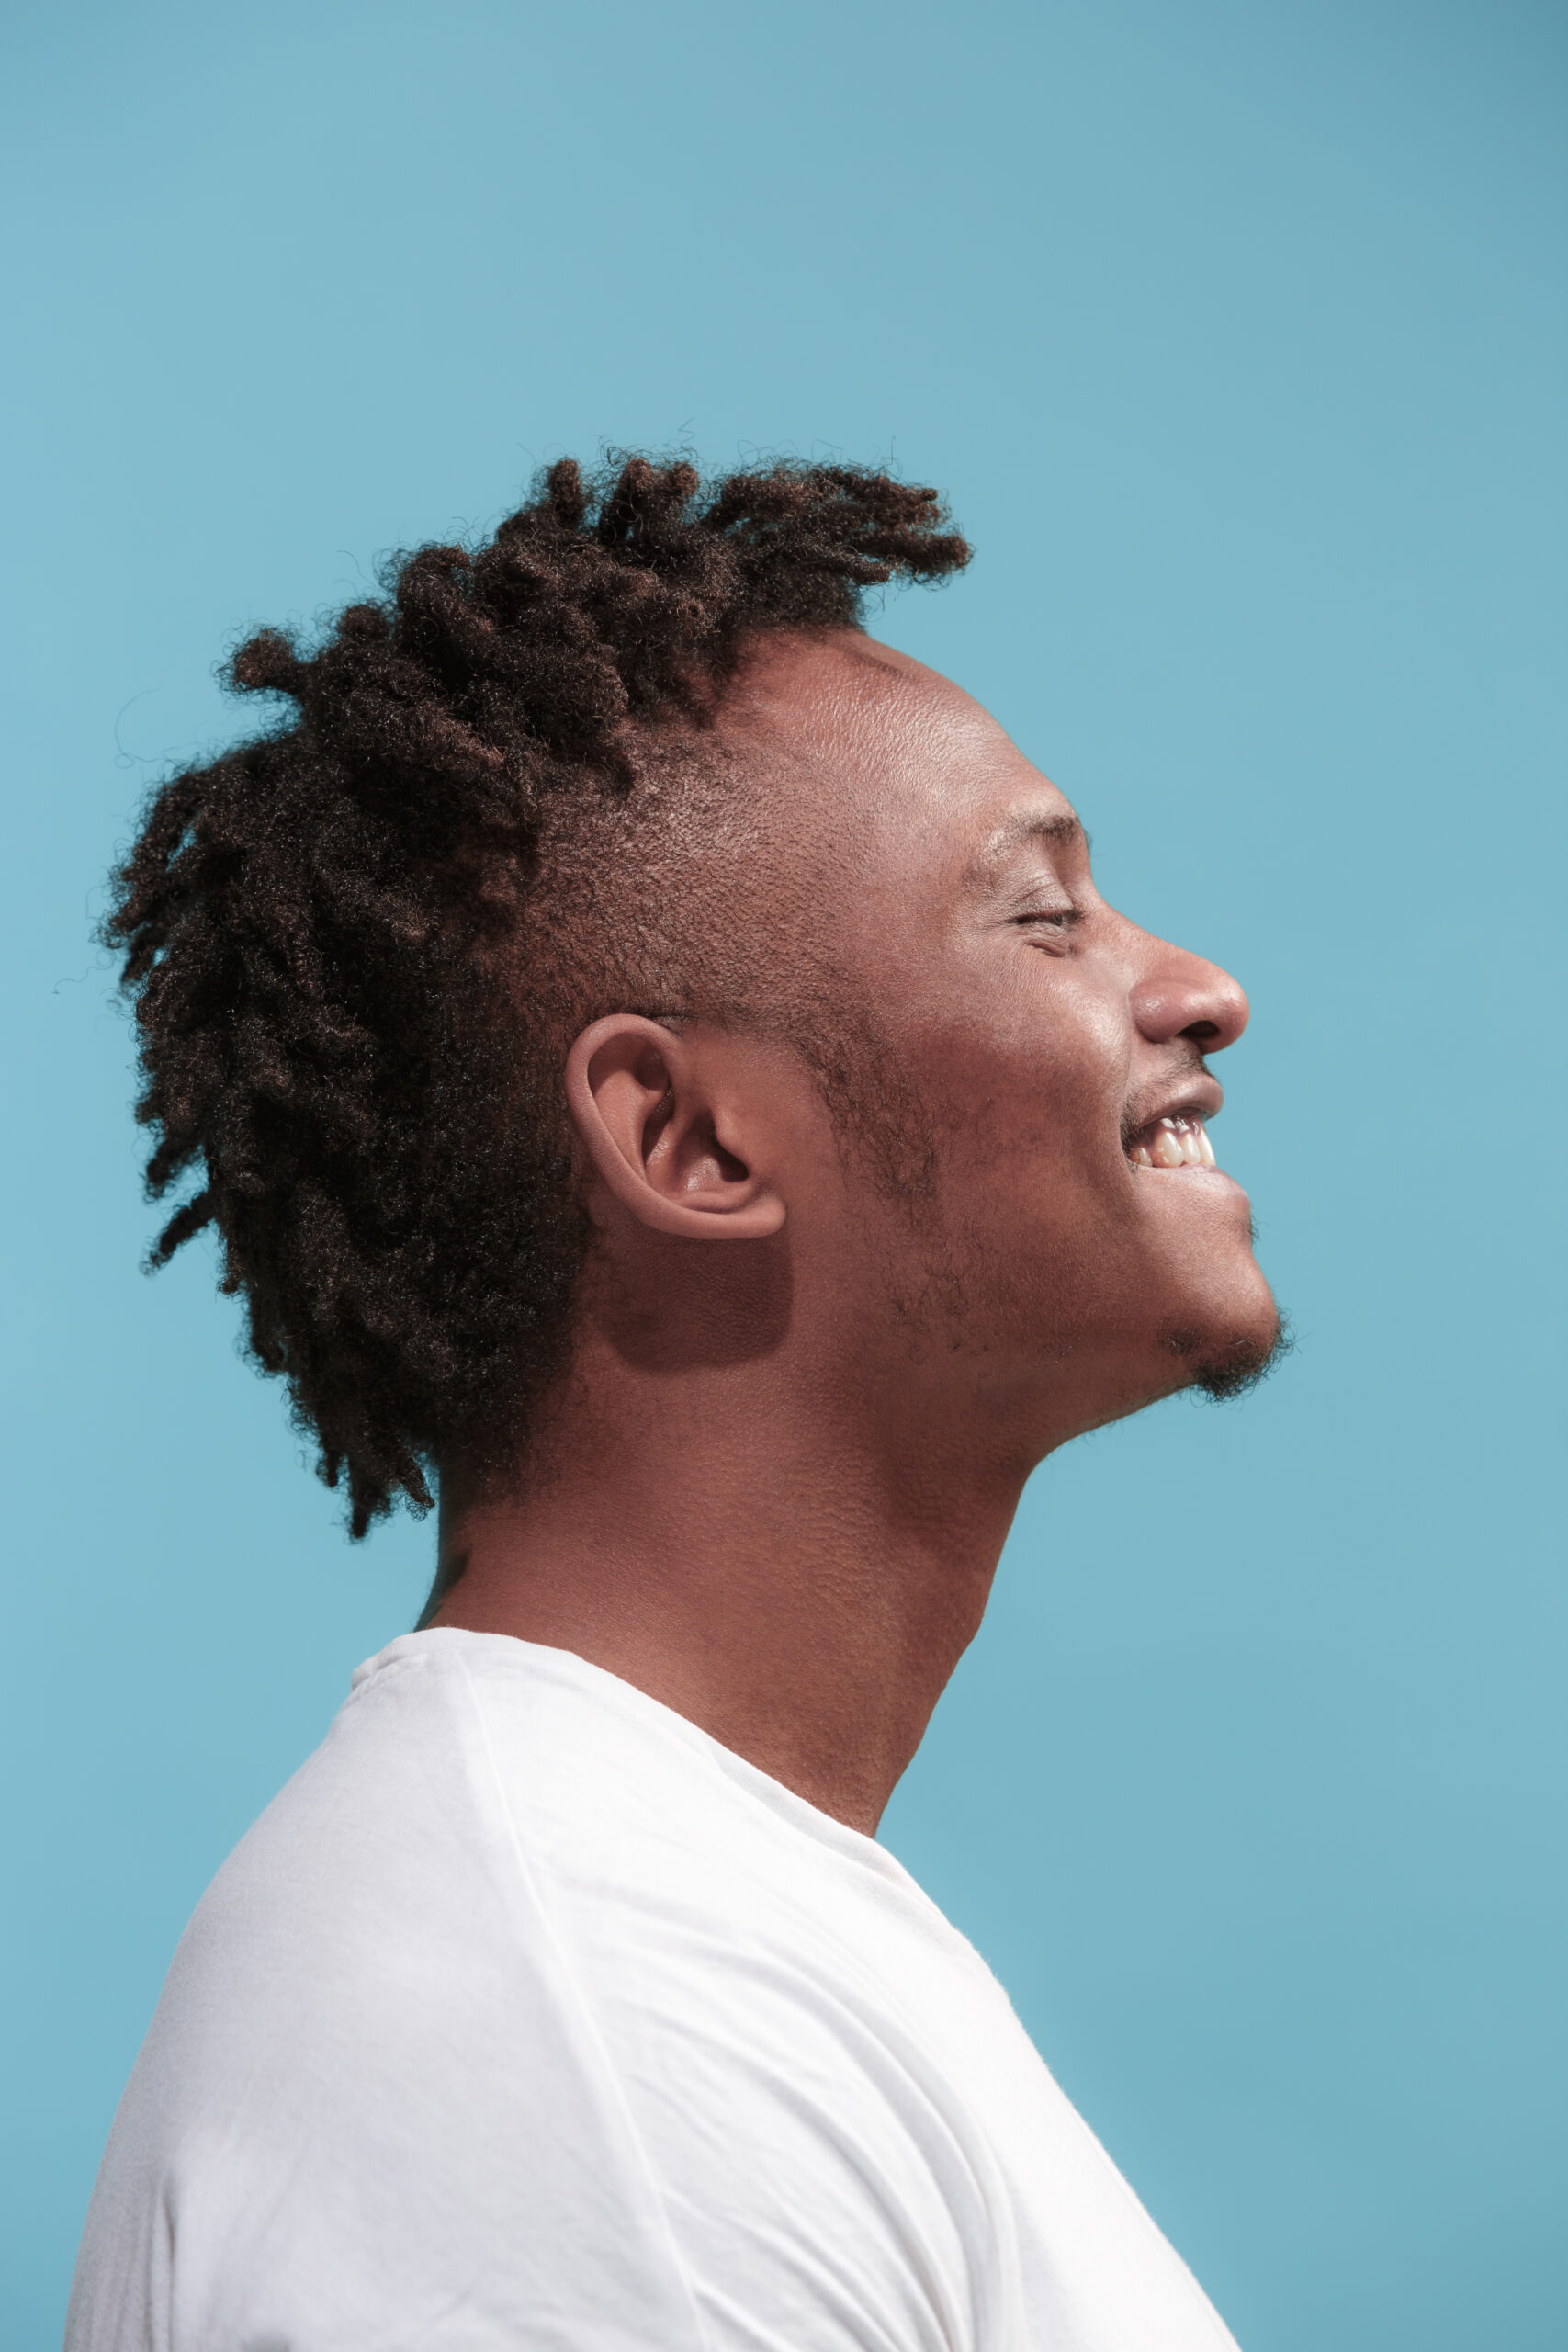 The happy business Afro-American man standing and smiling against blue background. Profile view.